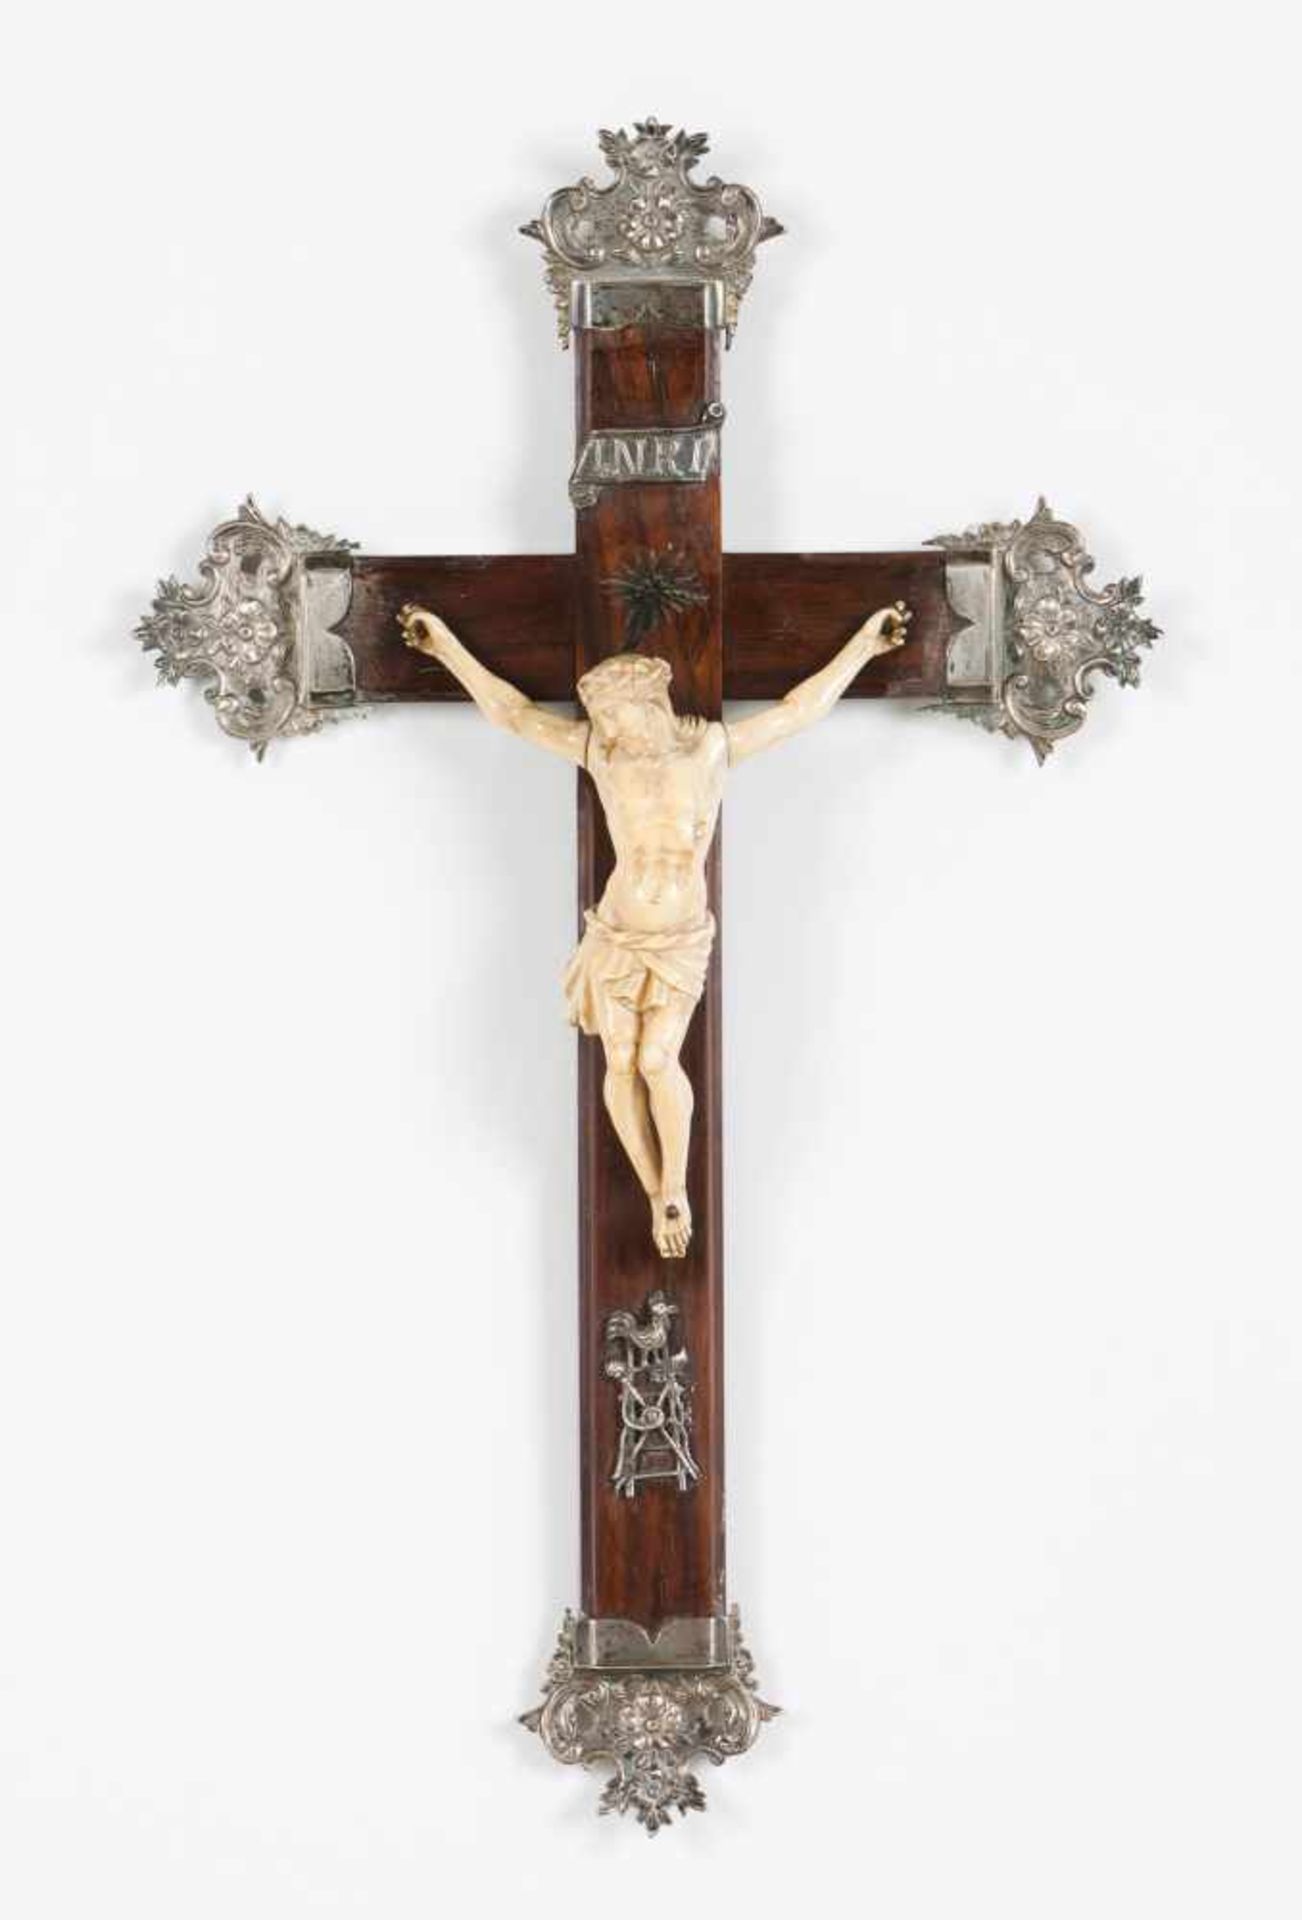 A crucified ChristIvory sculptureRosewood cross with applied silver elementsPortugal, 19th century(